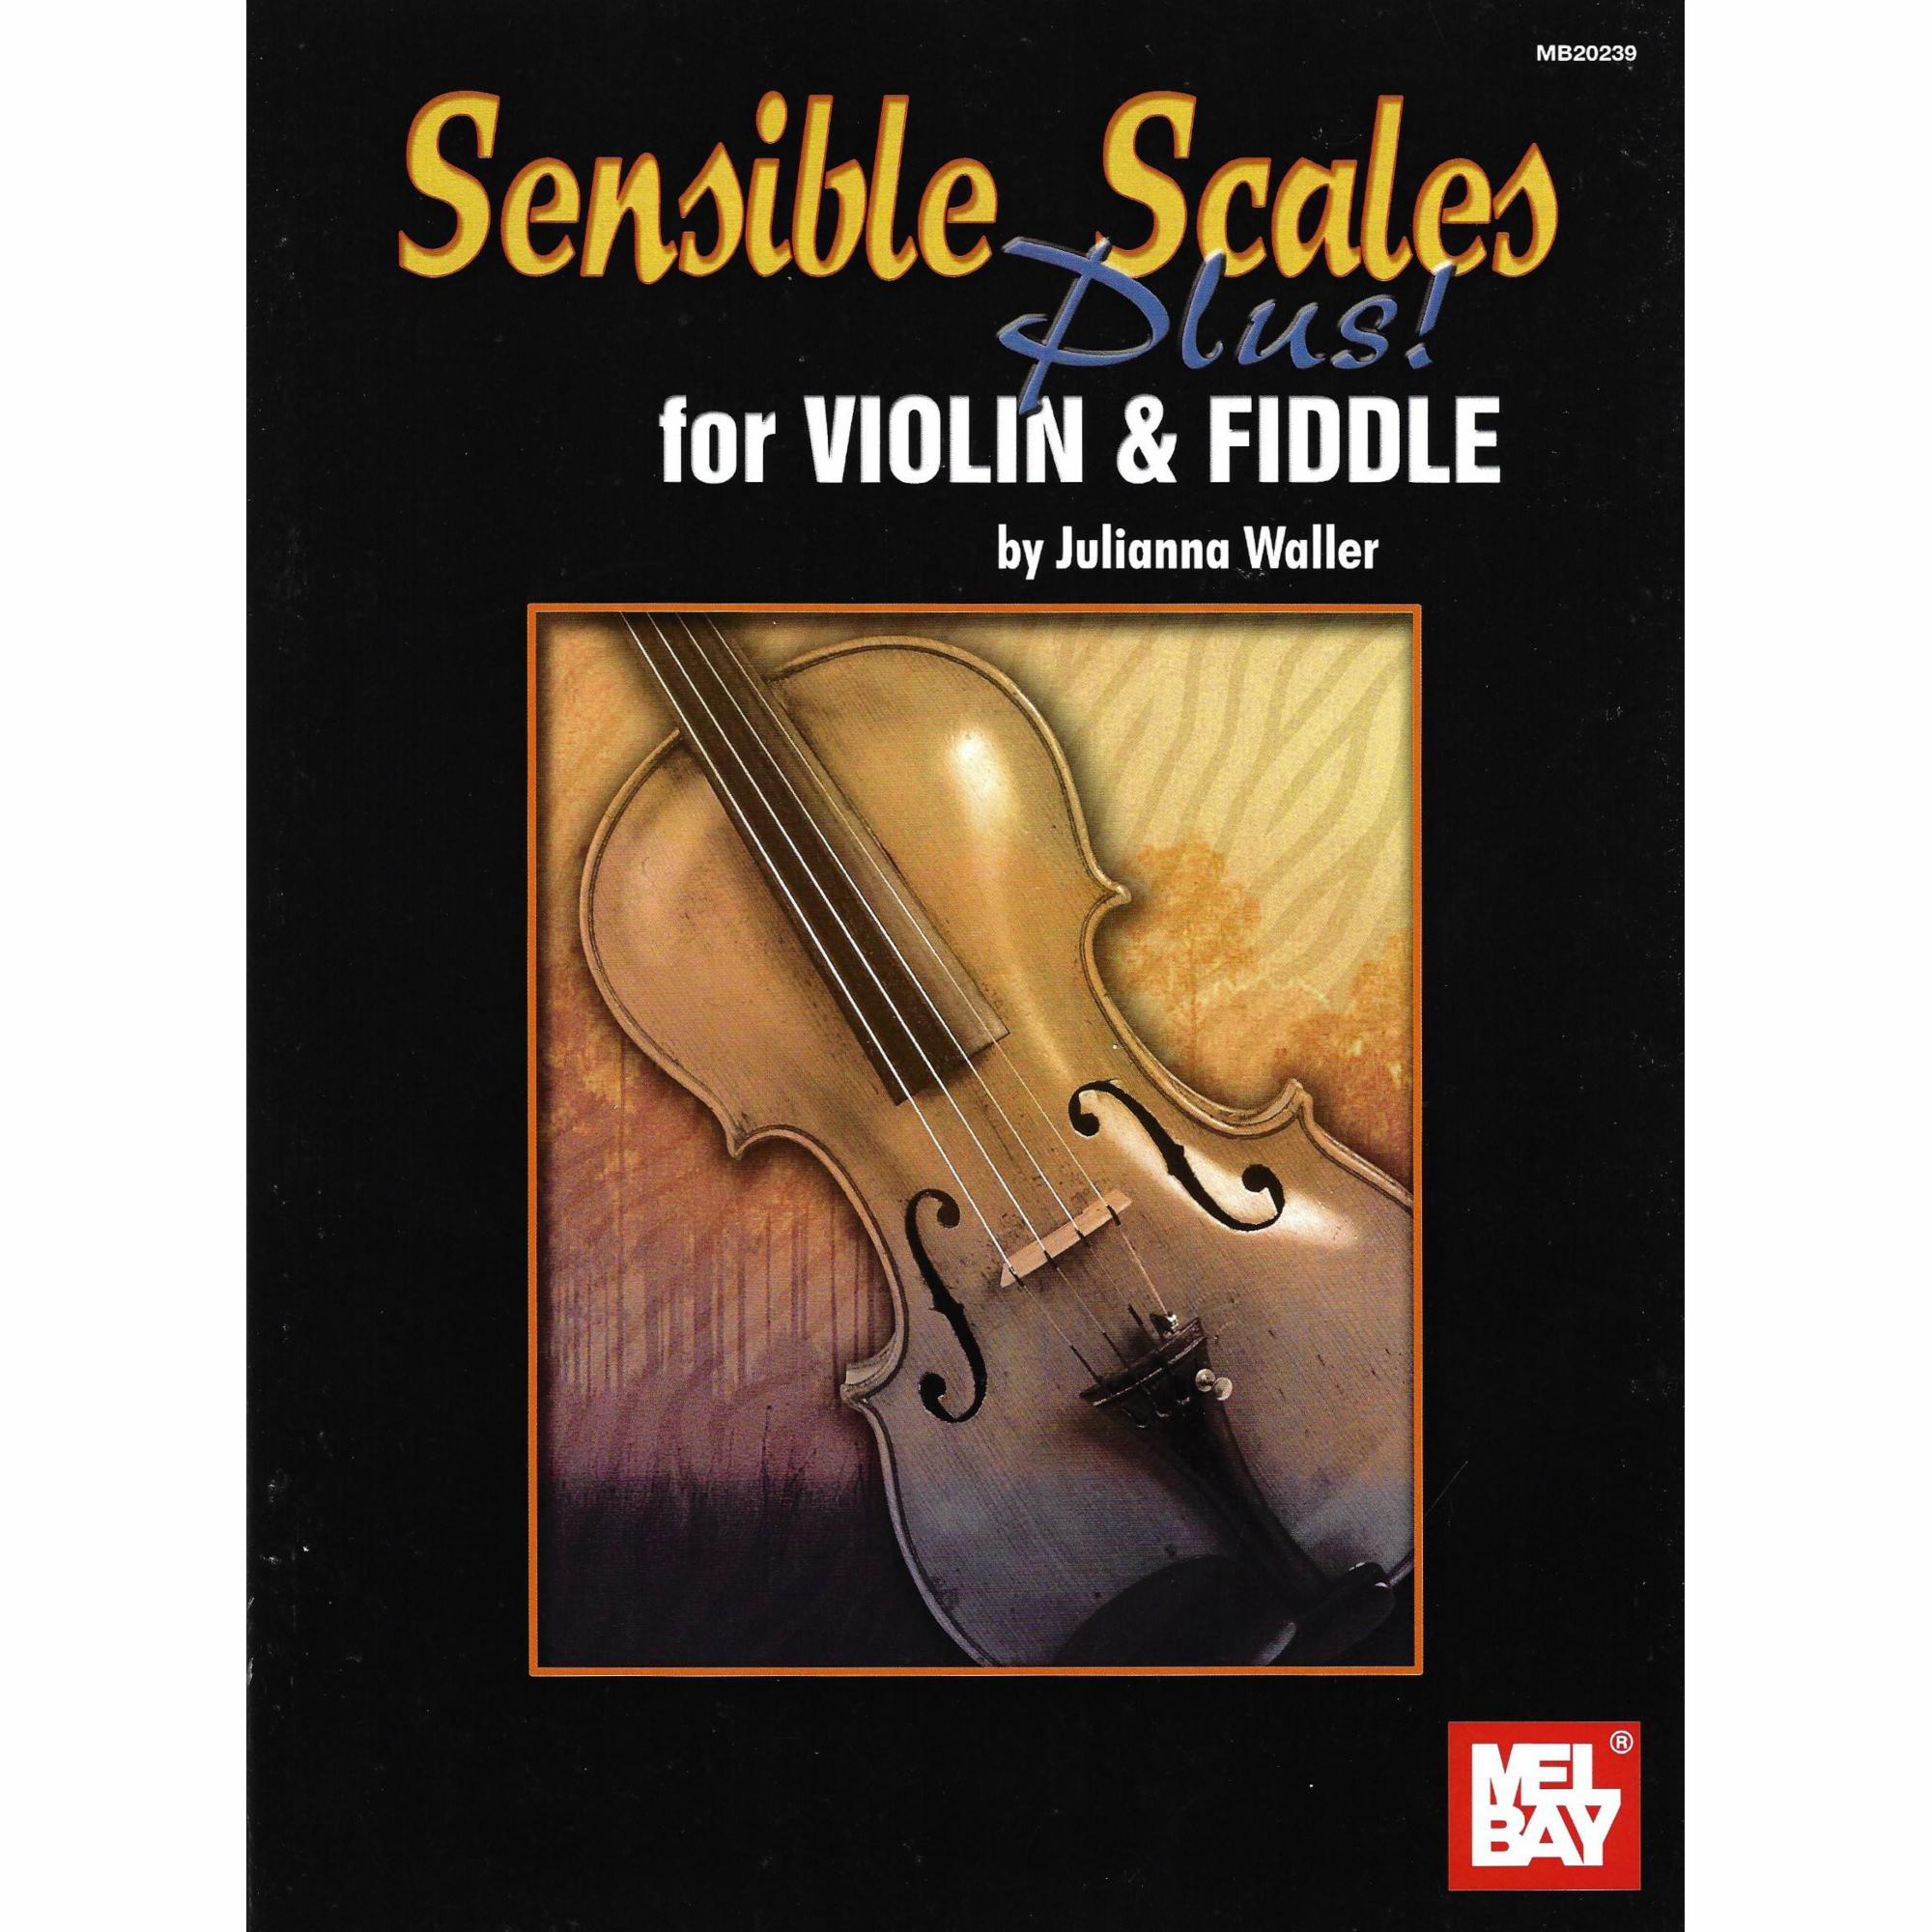 Sensible Scales Plus for Violin and Fiddle